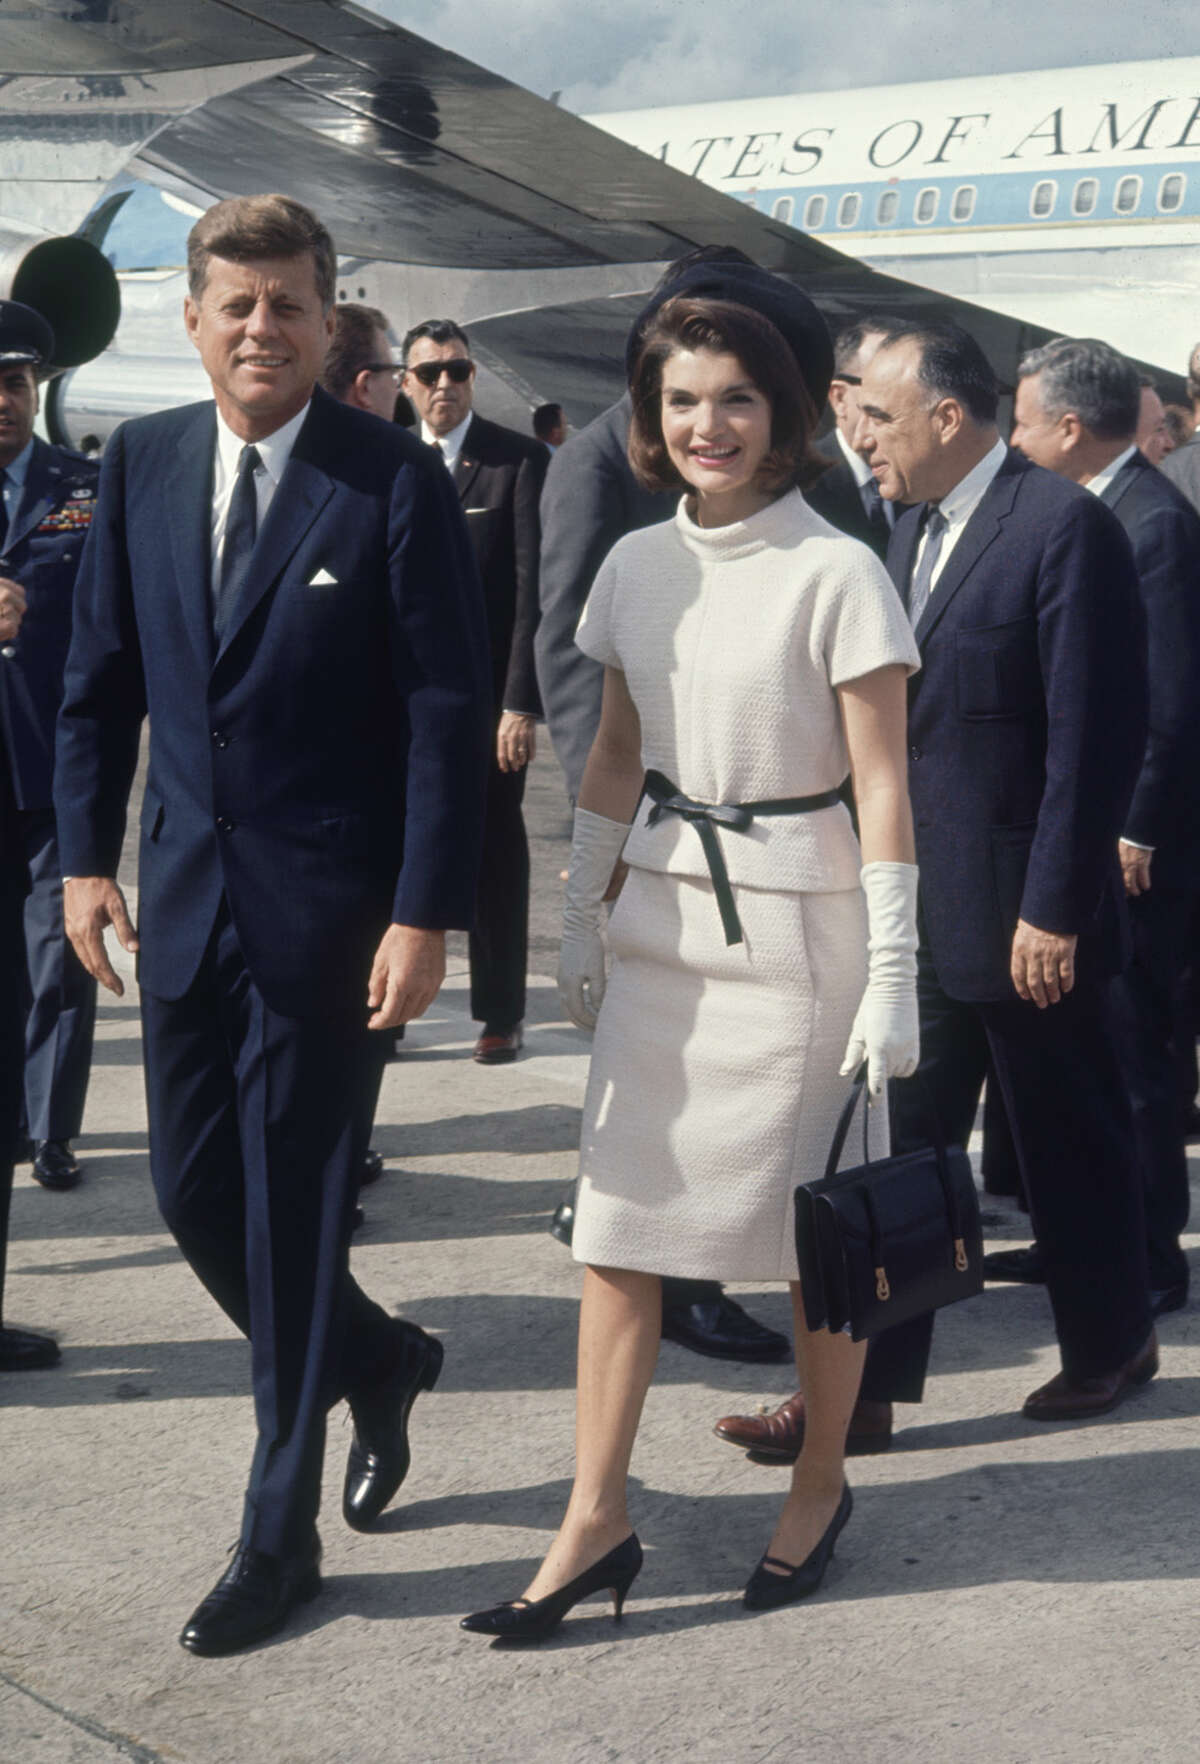 President John F. Kennedy and wife Jacqueline arrive at the San Antonio International Airport on Nov. 21, 1963.